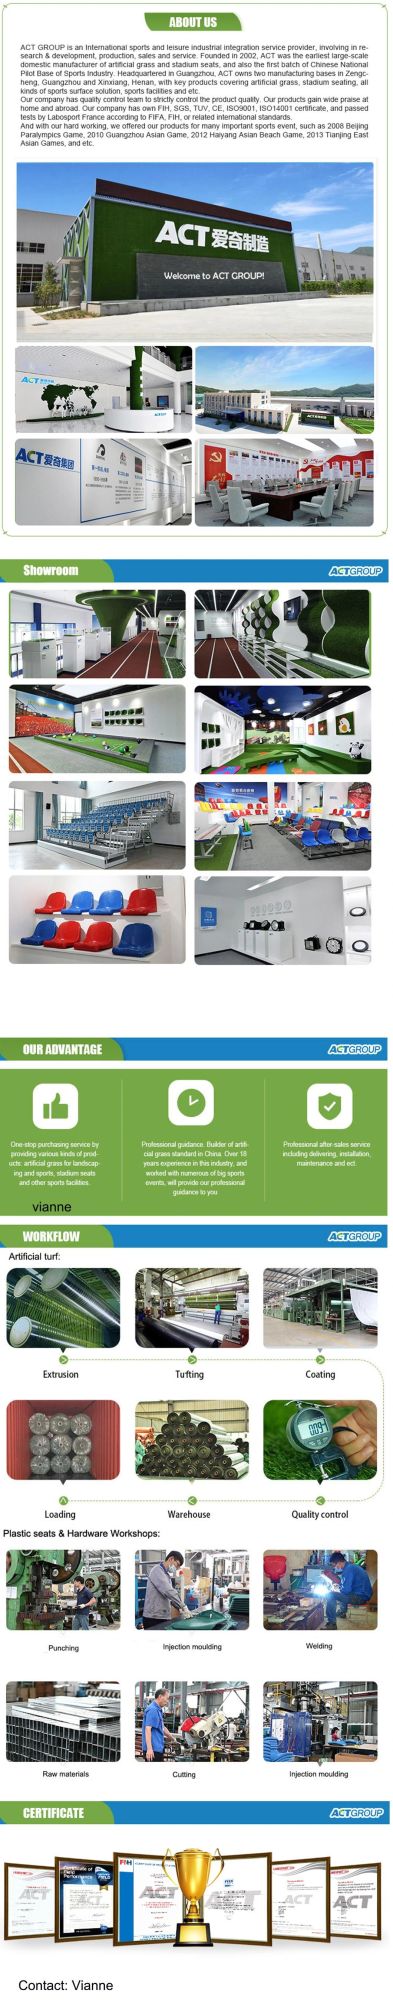 Floor Mounting Plastic Gym Seating, Outdoor Sports Furniture, Fixed Stadium Seats